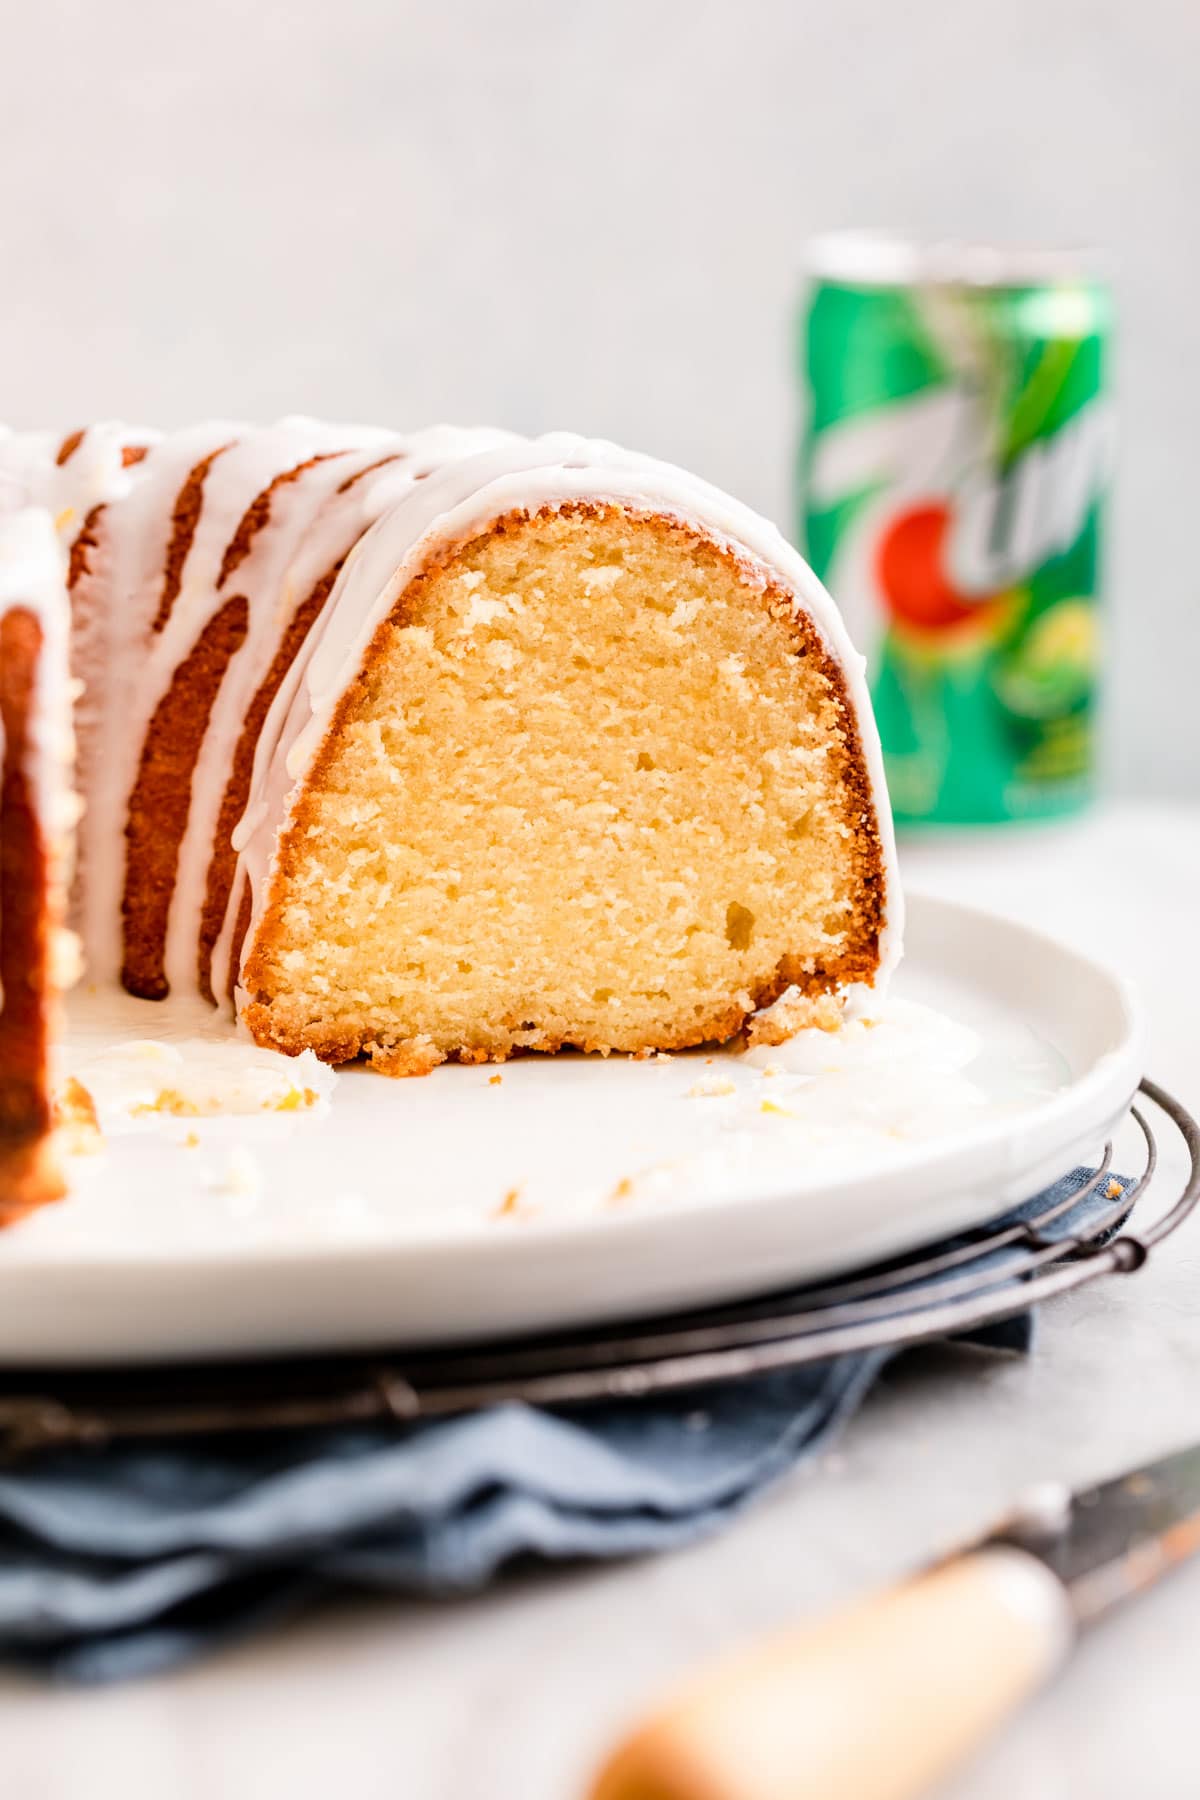 7up Pound Cake baked on plate with glaze side view slice removed